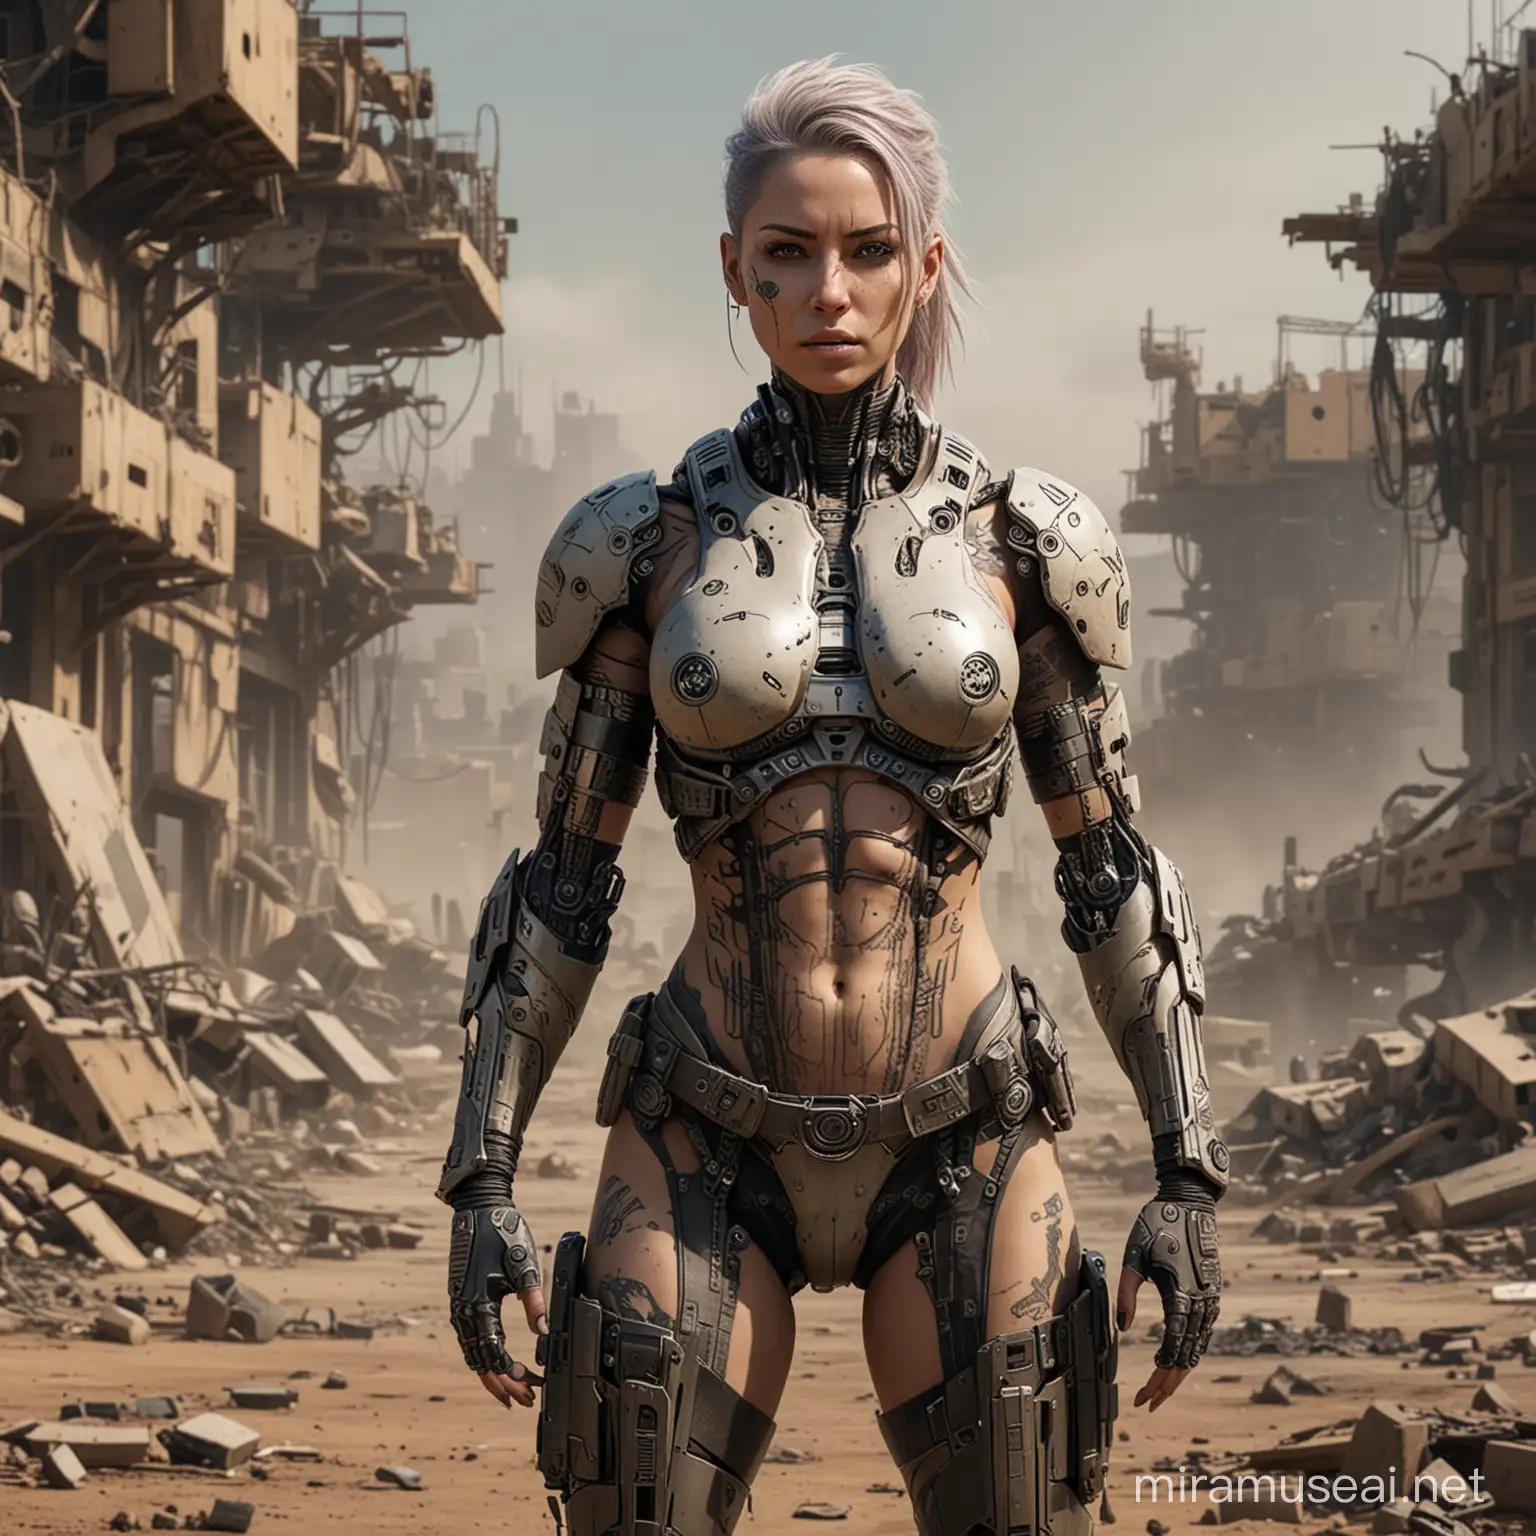 female future warrior in a post apocolypse world, tattoos, part human and part cybernetics, in a warzone, full body